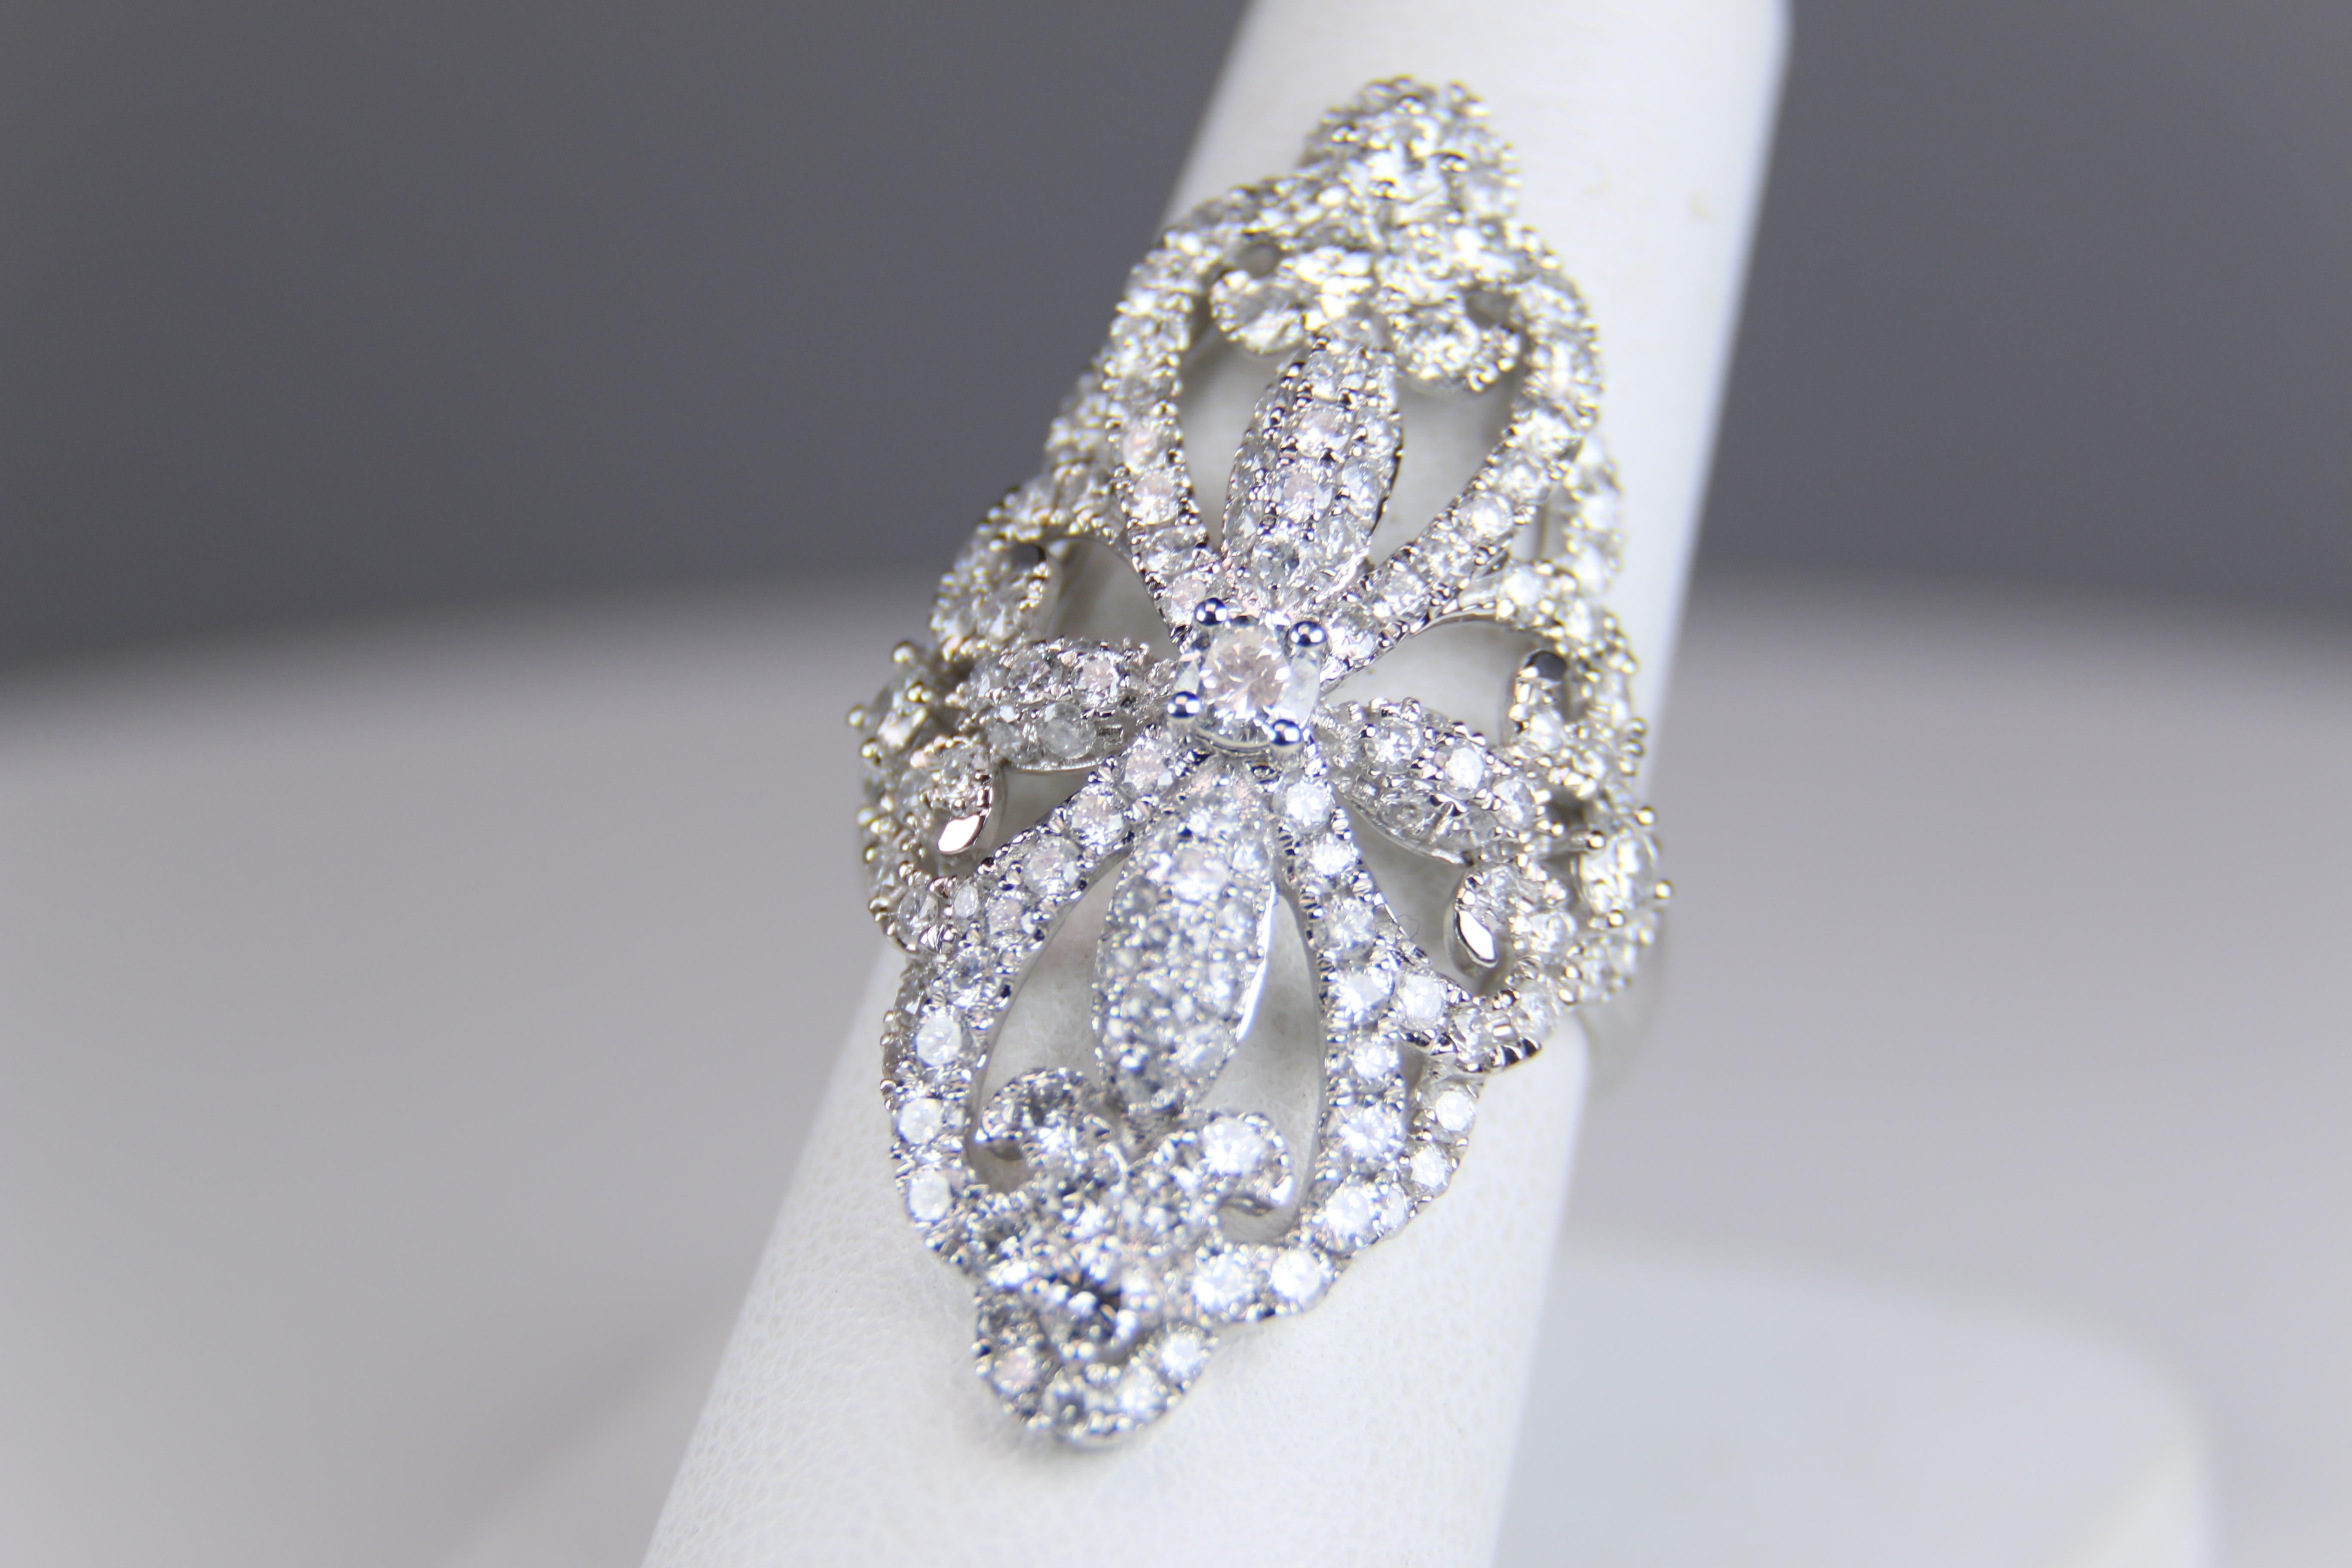 Elongated Filigree Diamond and 14K White Gold Ring features an estimated 1.90 carats of white, eye clean round brilliant cut diamonds both pave and prong set in an open filigree style design. Ring is an impressive 1.5 inches long so as to accentuate